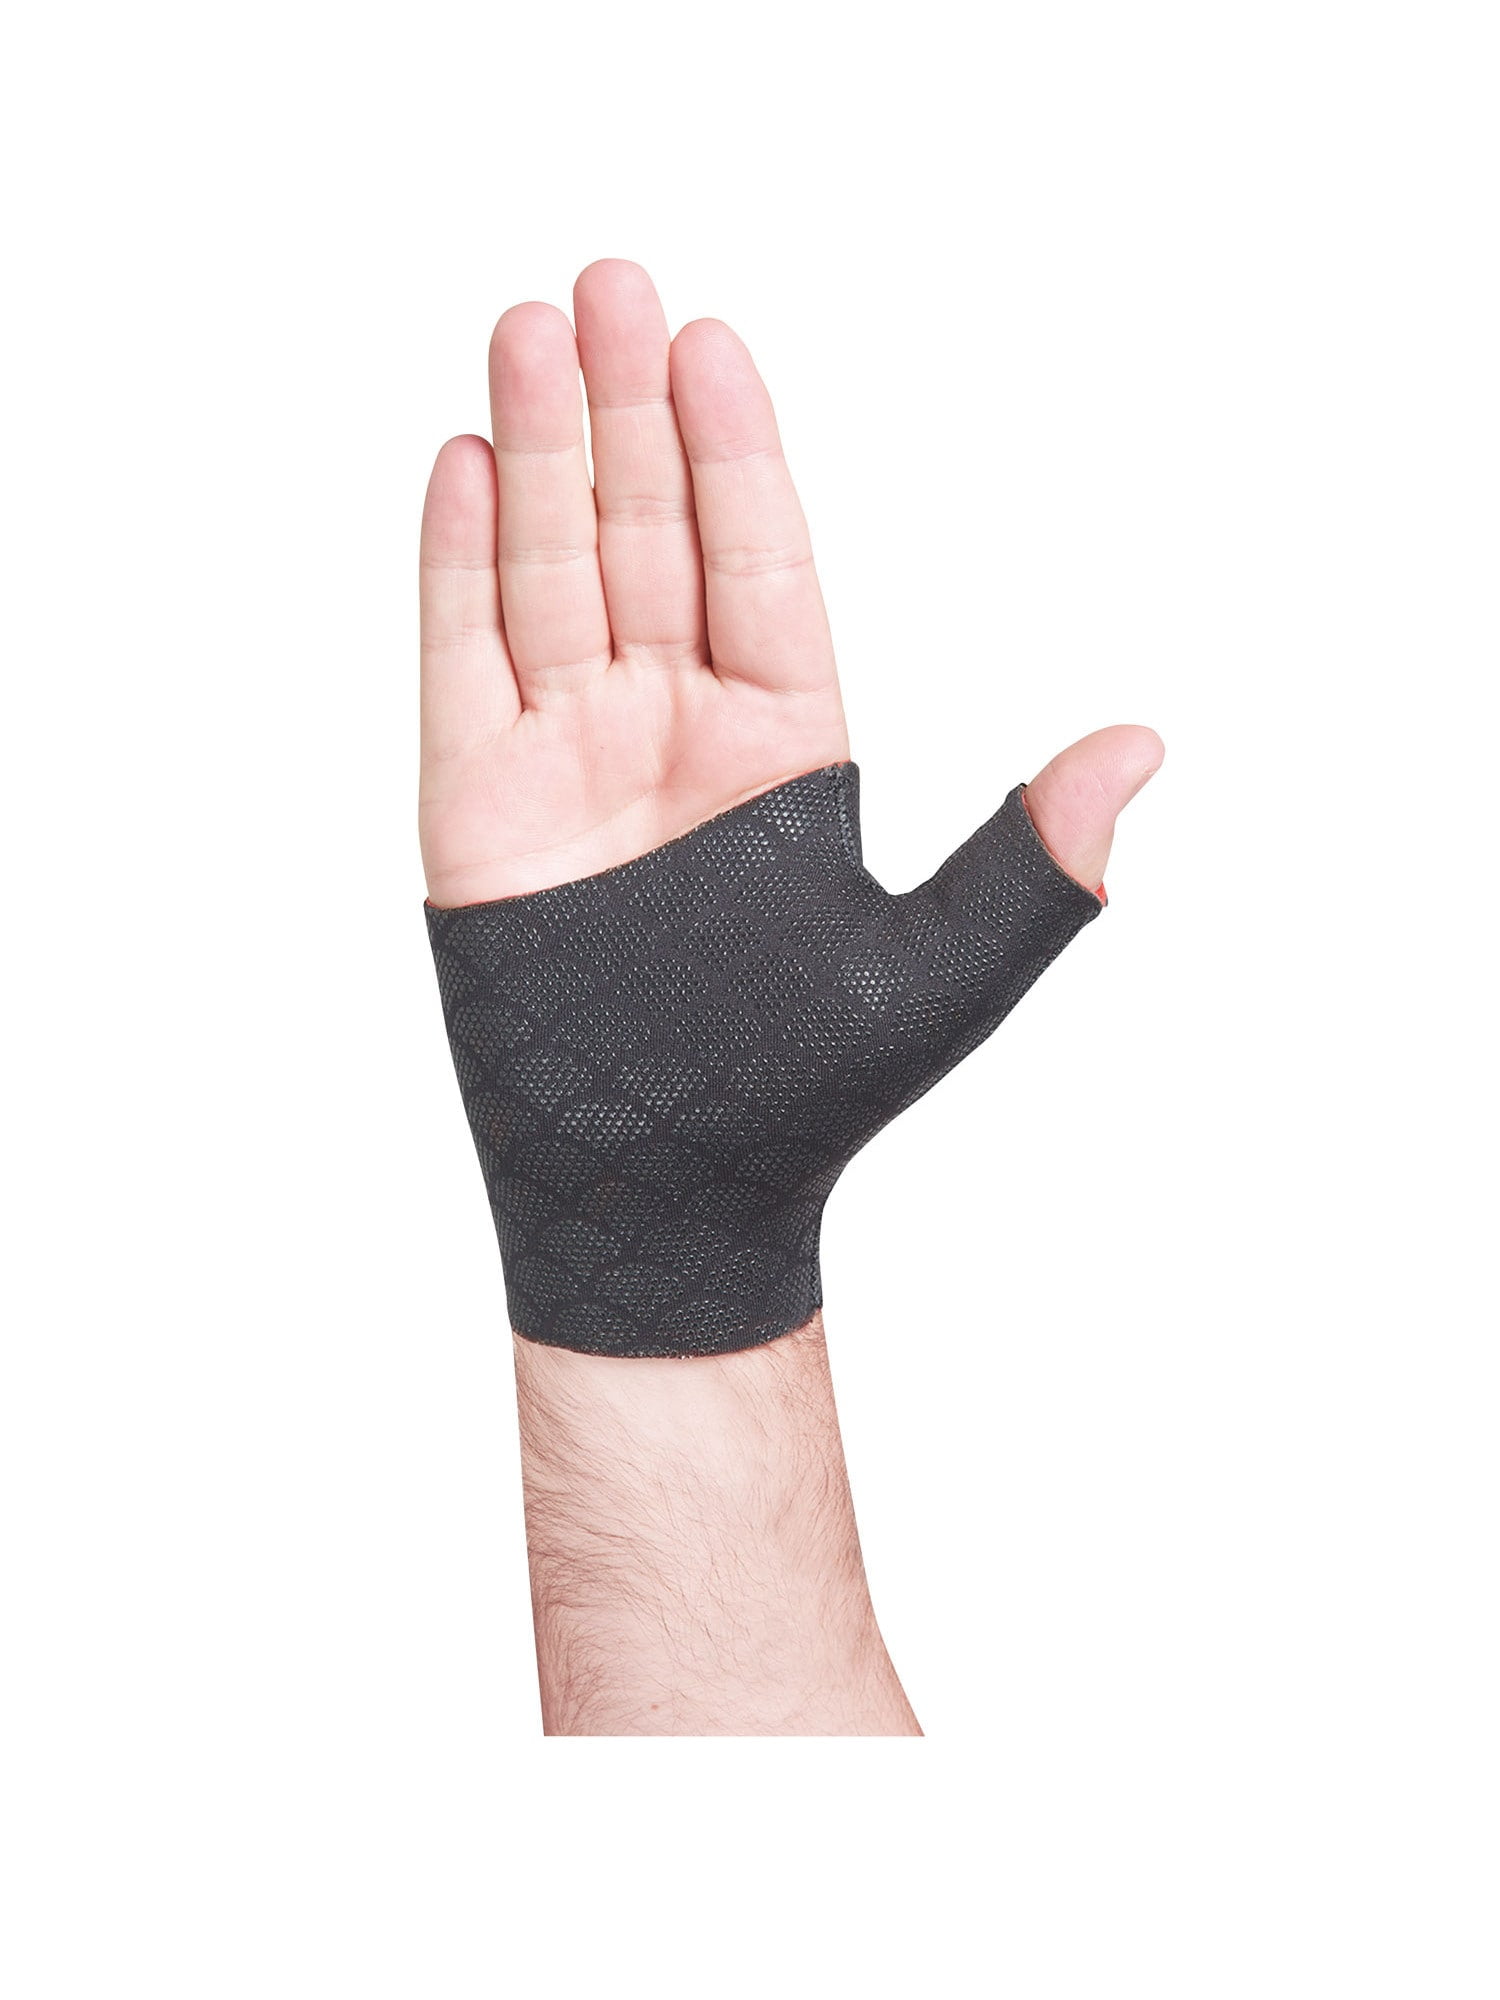 US Magnetic Therapy Thumb Splint Wrist And Thumb Support Brace Sleeves Gloves 